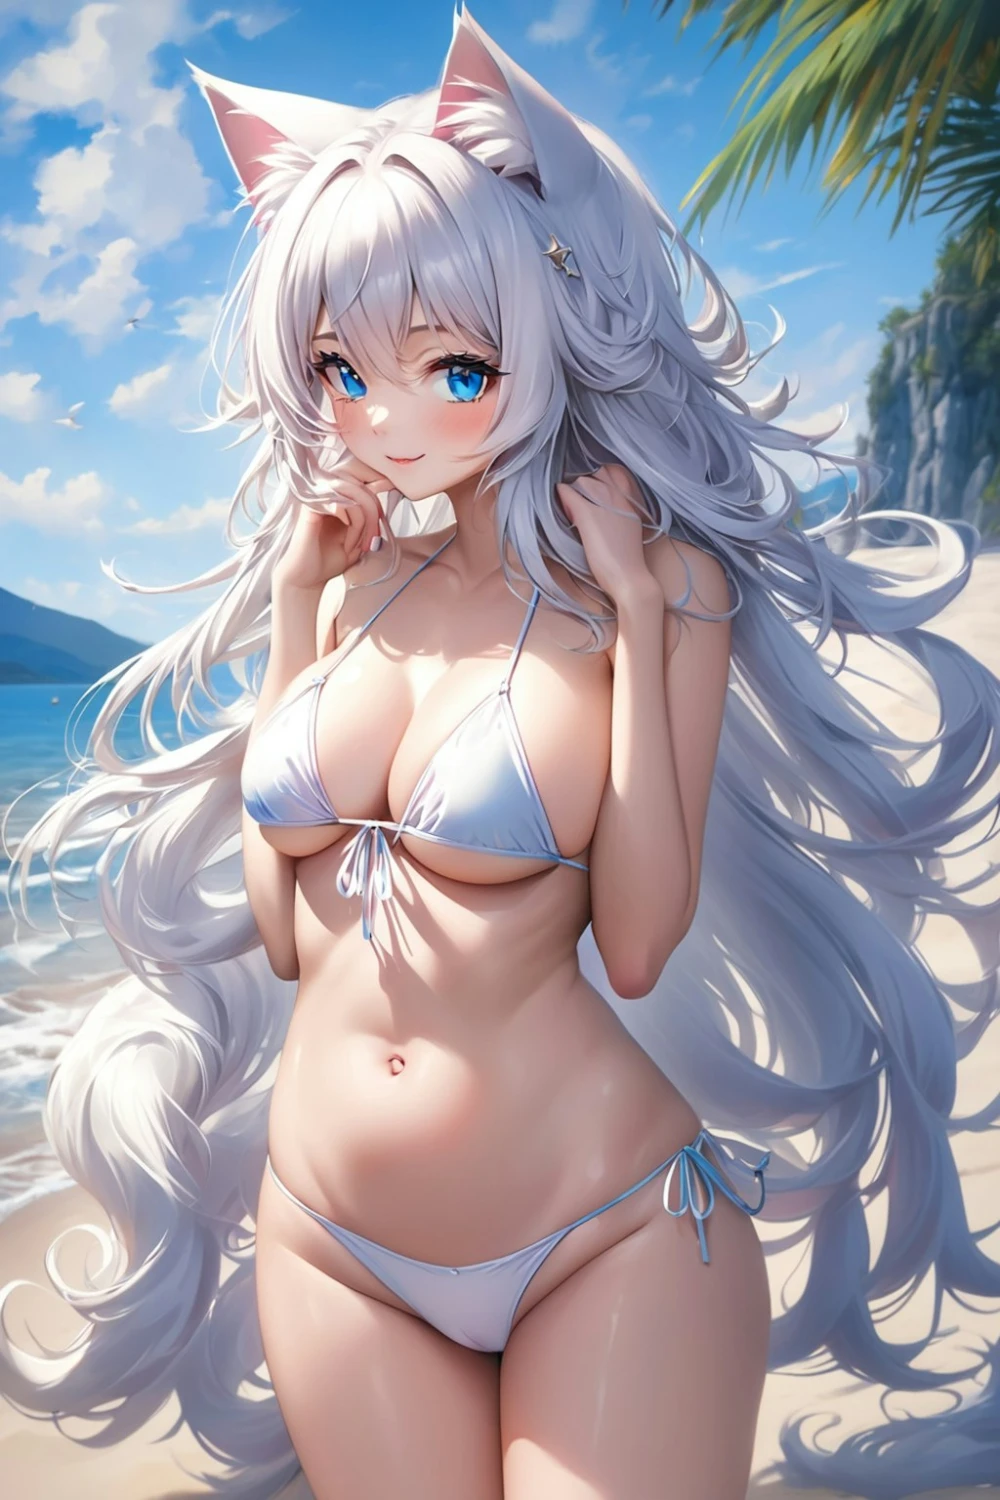 silver-hair-anime-style-all-ages-2-32